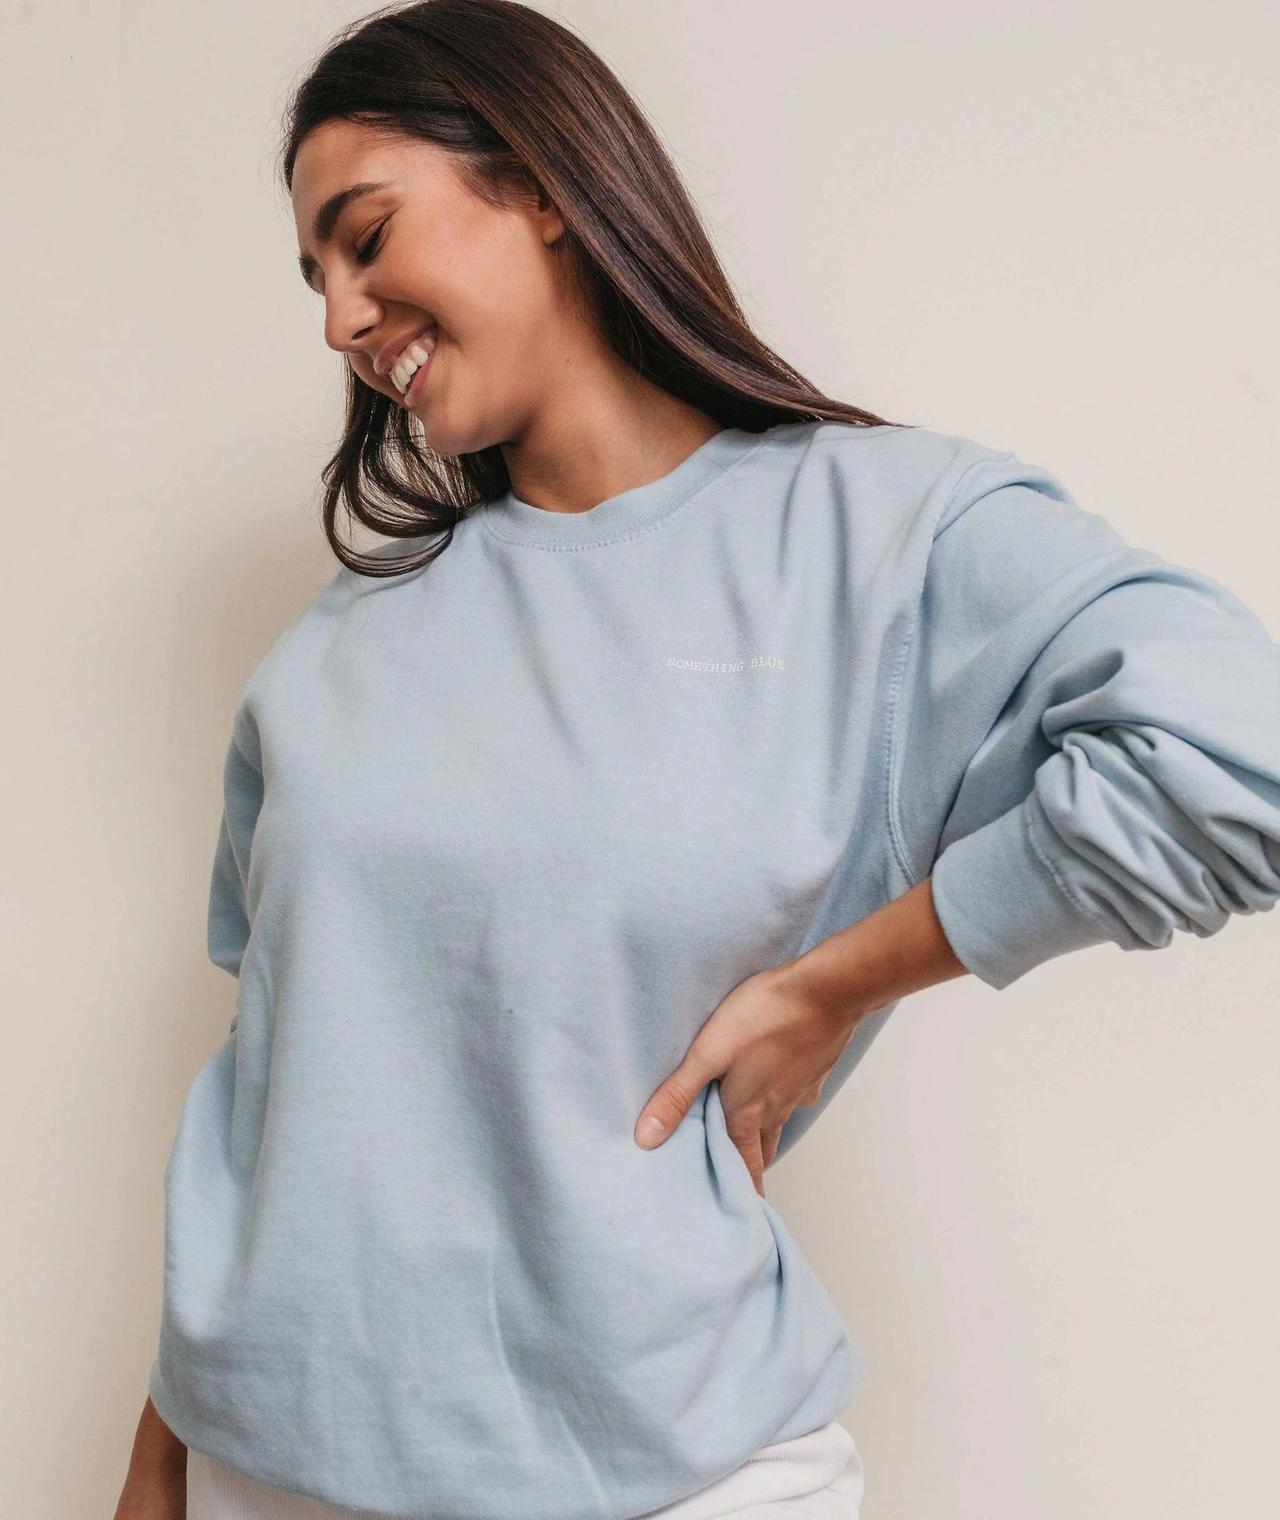 Tanned woman with brown hair laughing wearing a light blue jumper with something blue embroidered onto the front